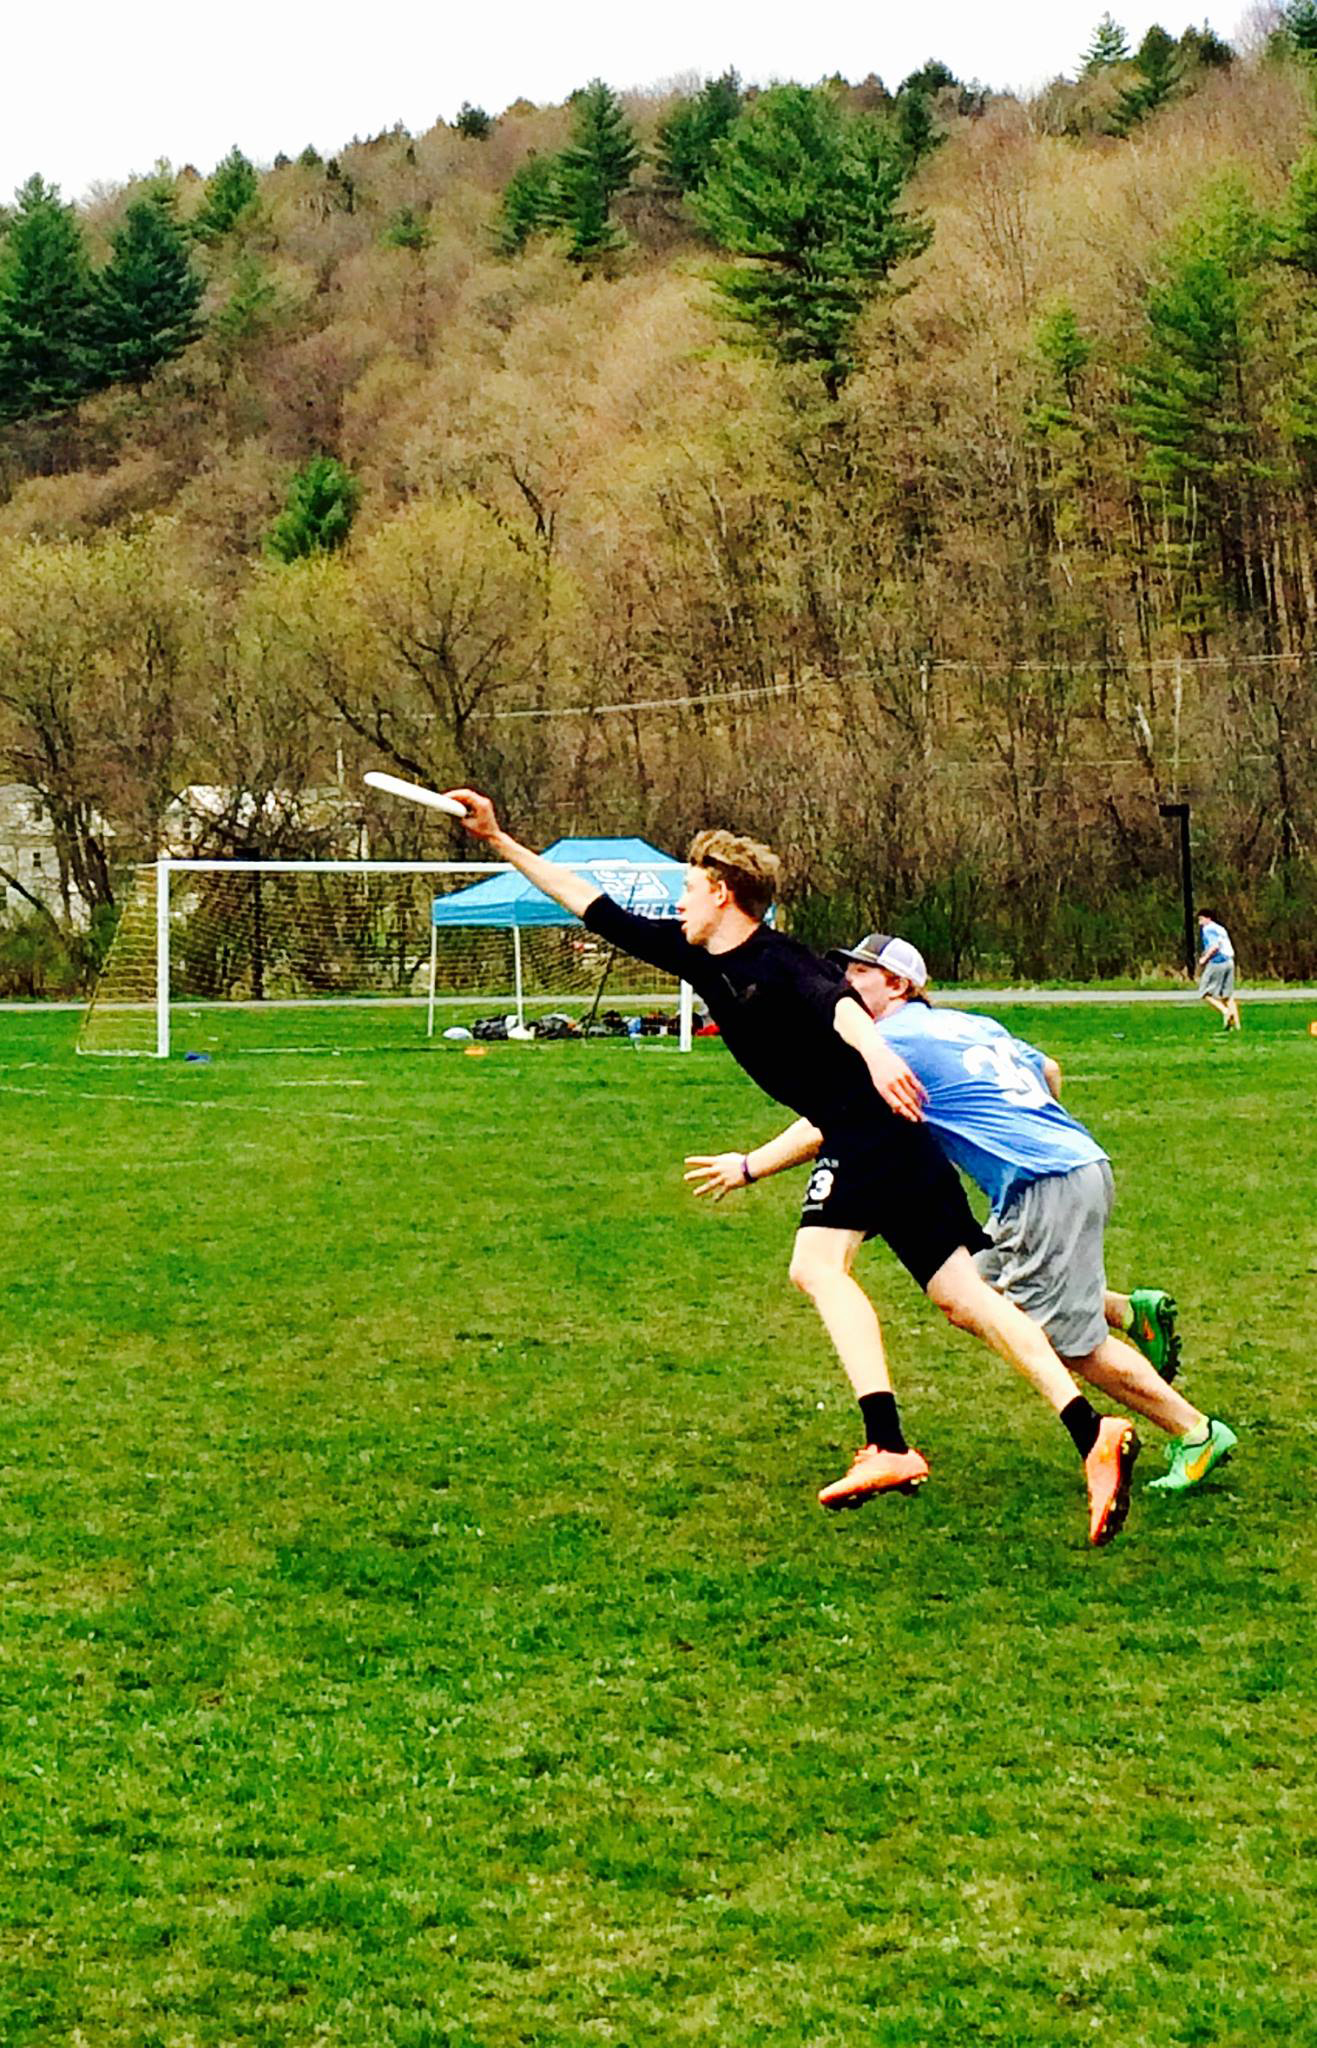 Boys and girls who play Ultimate Frisbee often prioritize sportsmanship over the score, says Montpelier High School's athletic director. Spirit awards are given out at every tournament. 